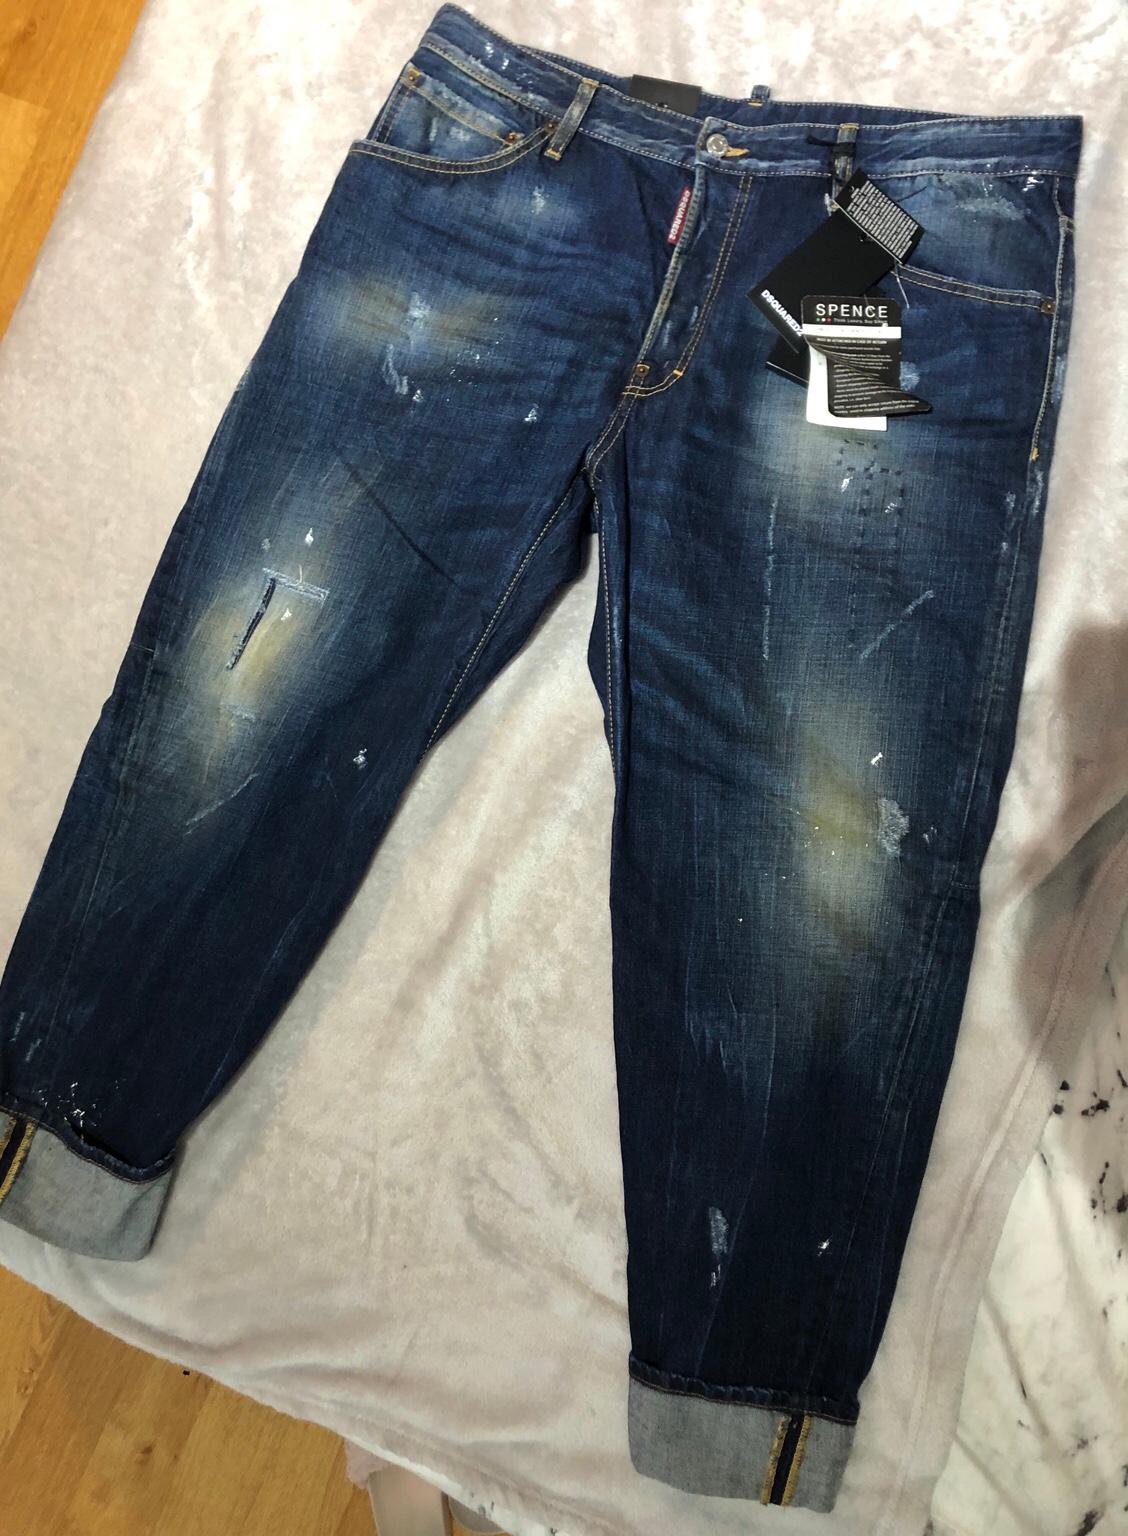 dsquared jeans 54